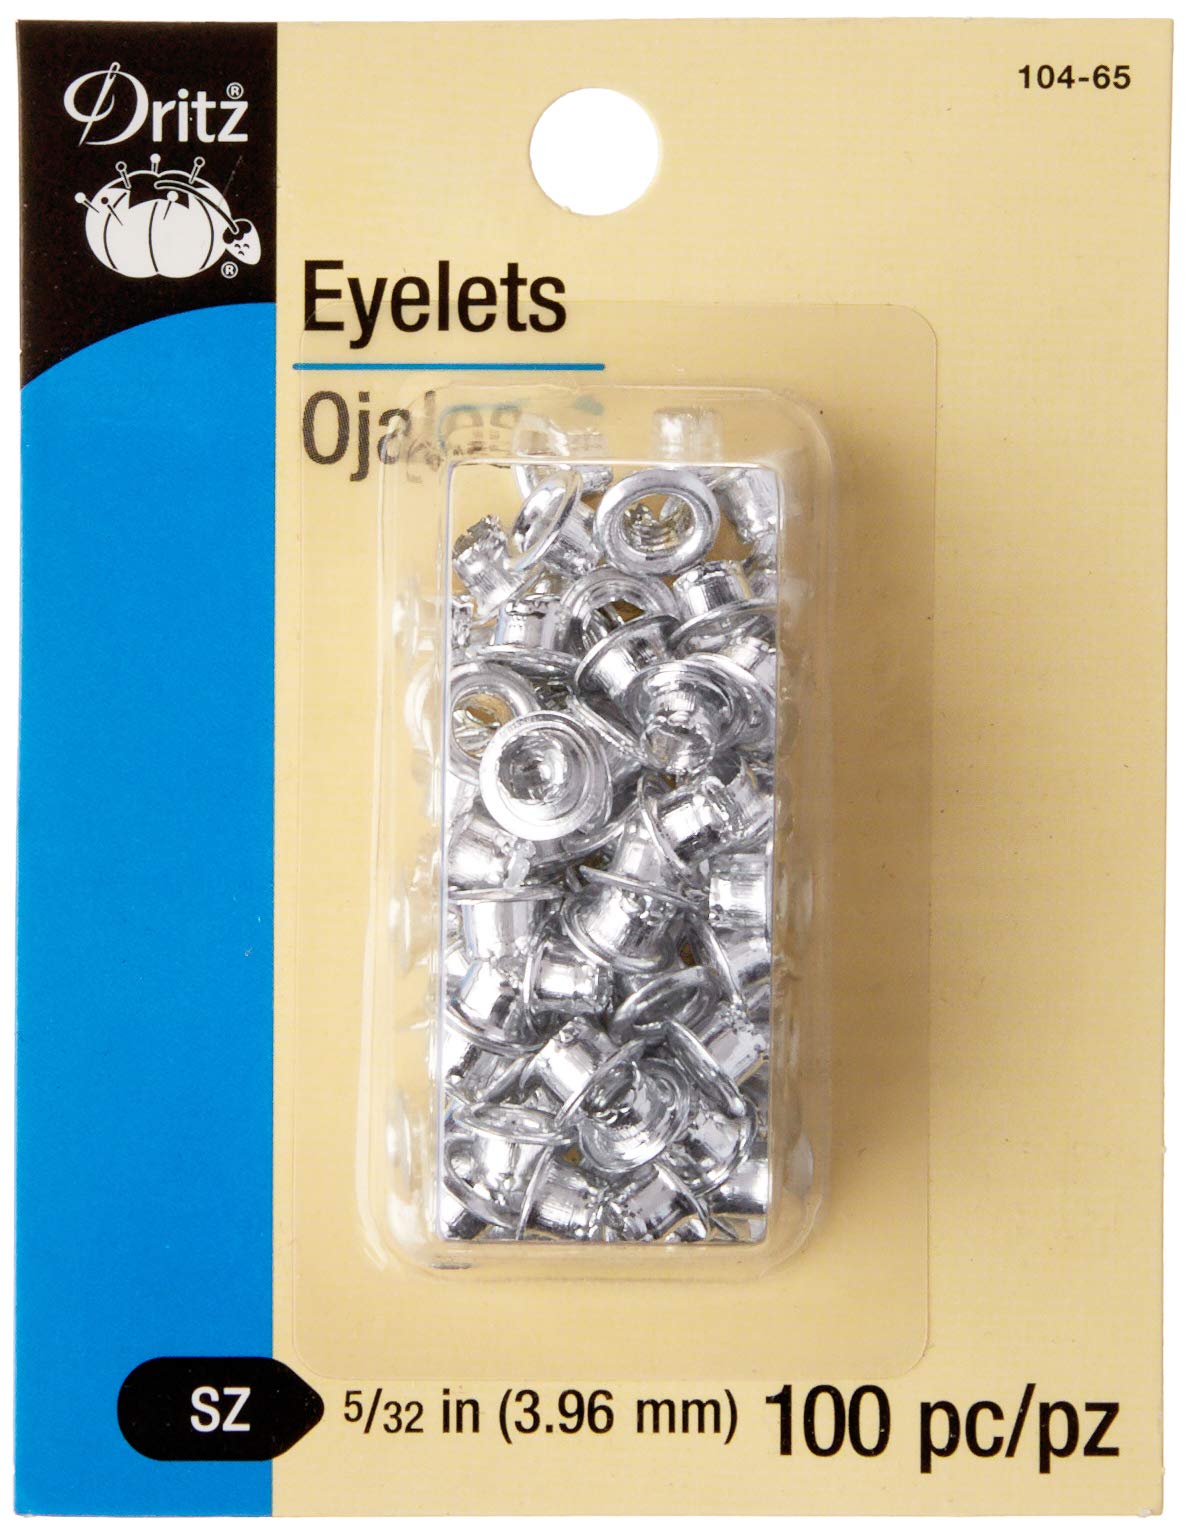 Eyelet Setting Tool and Bit - StewMac